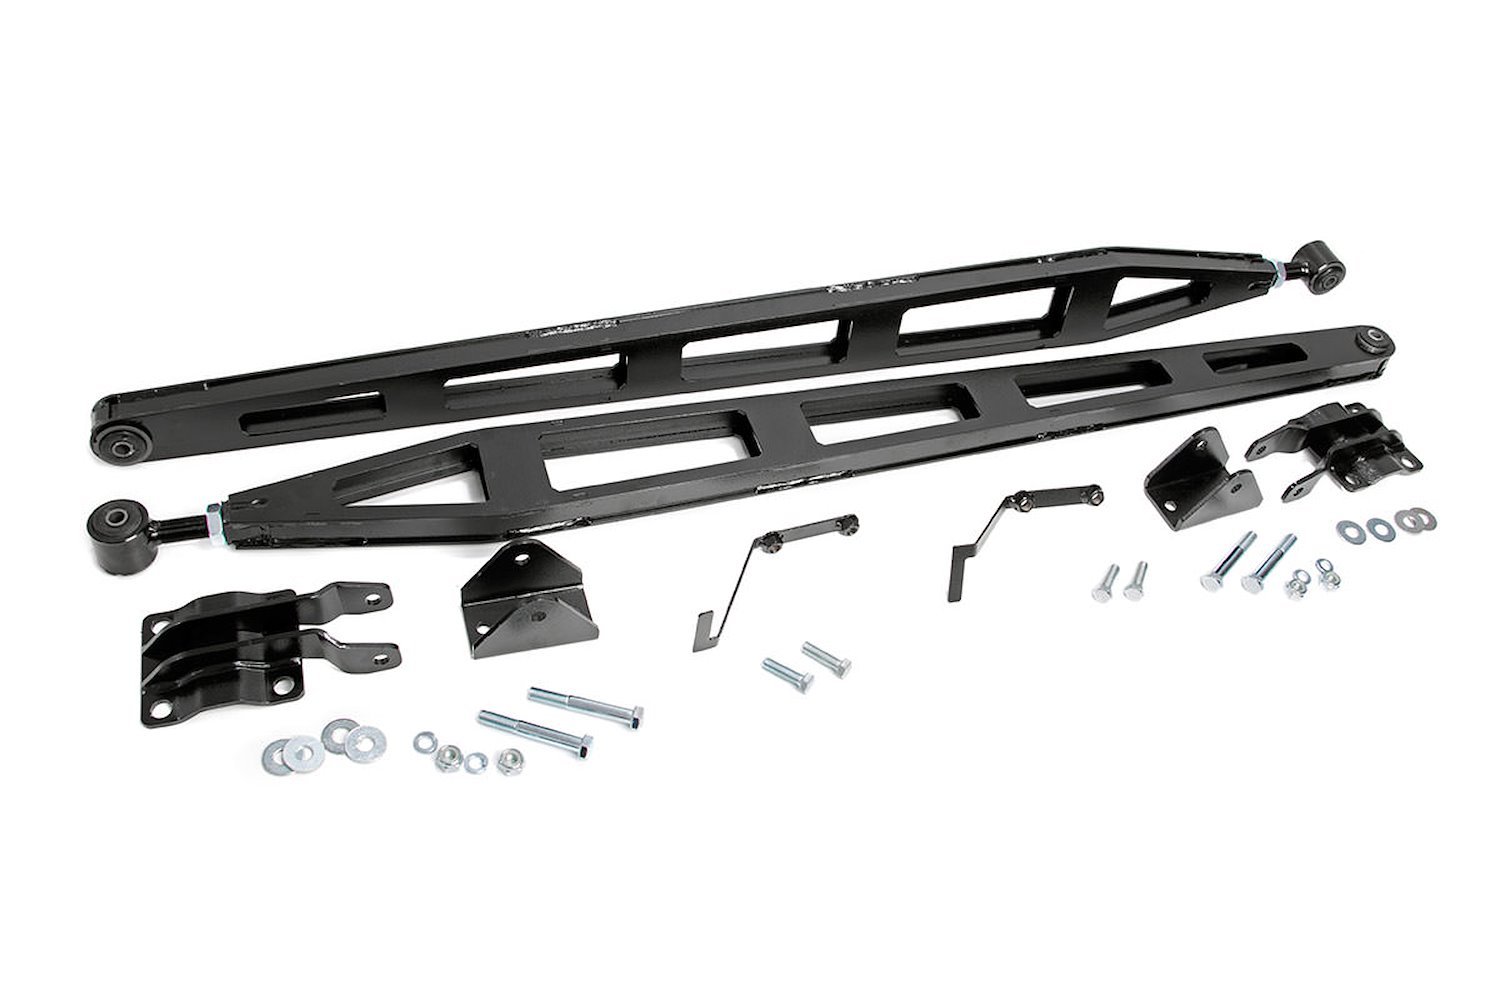 1070A Traction Bar Kit for 5-6-inch Lifts